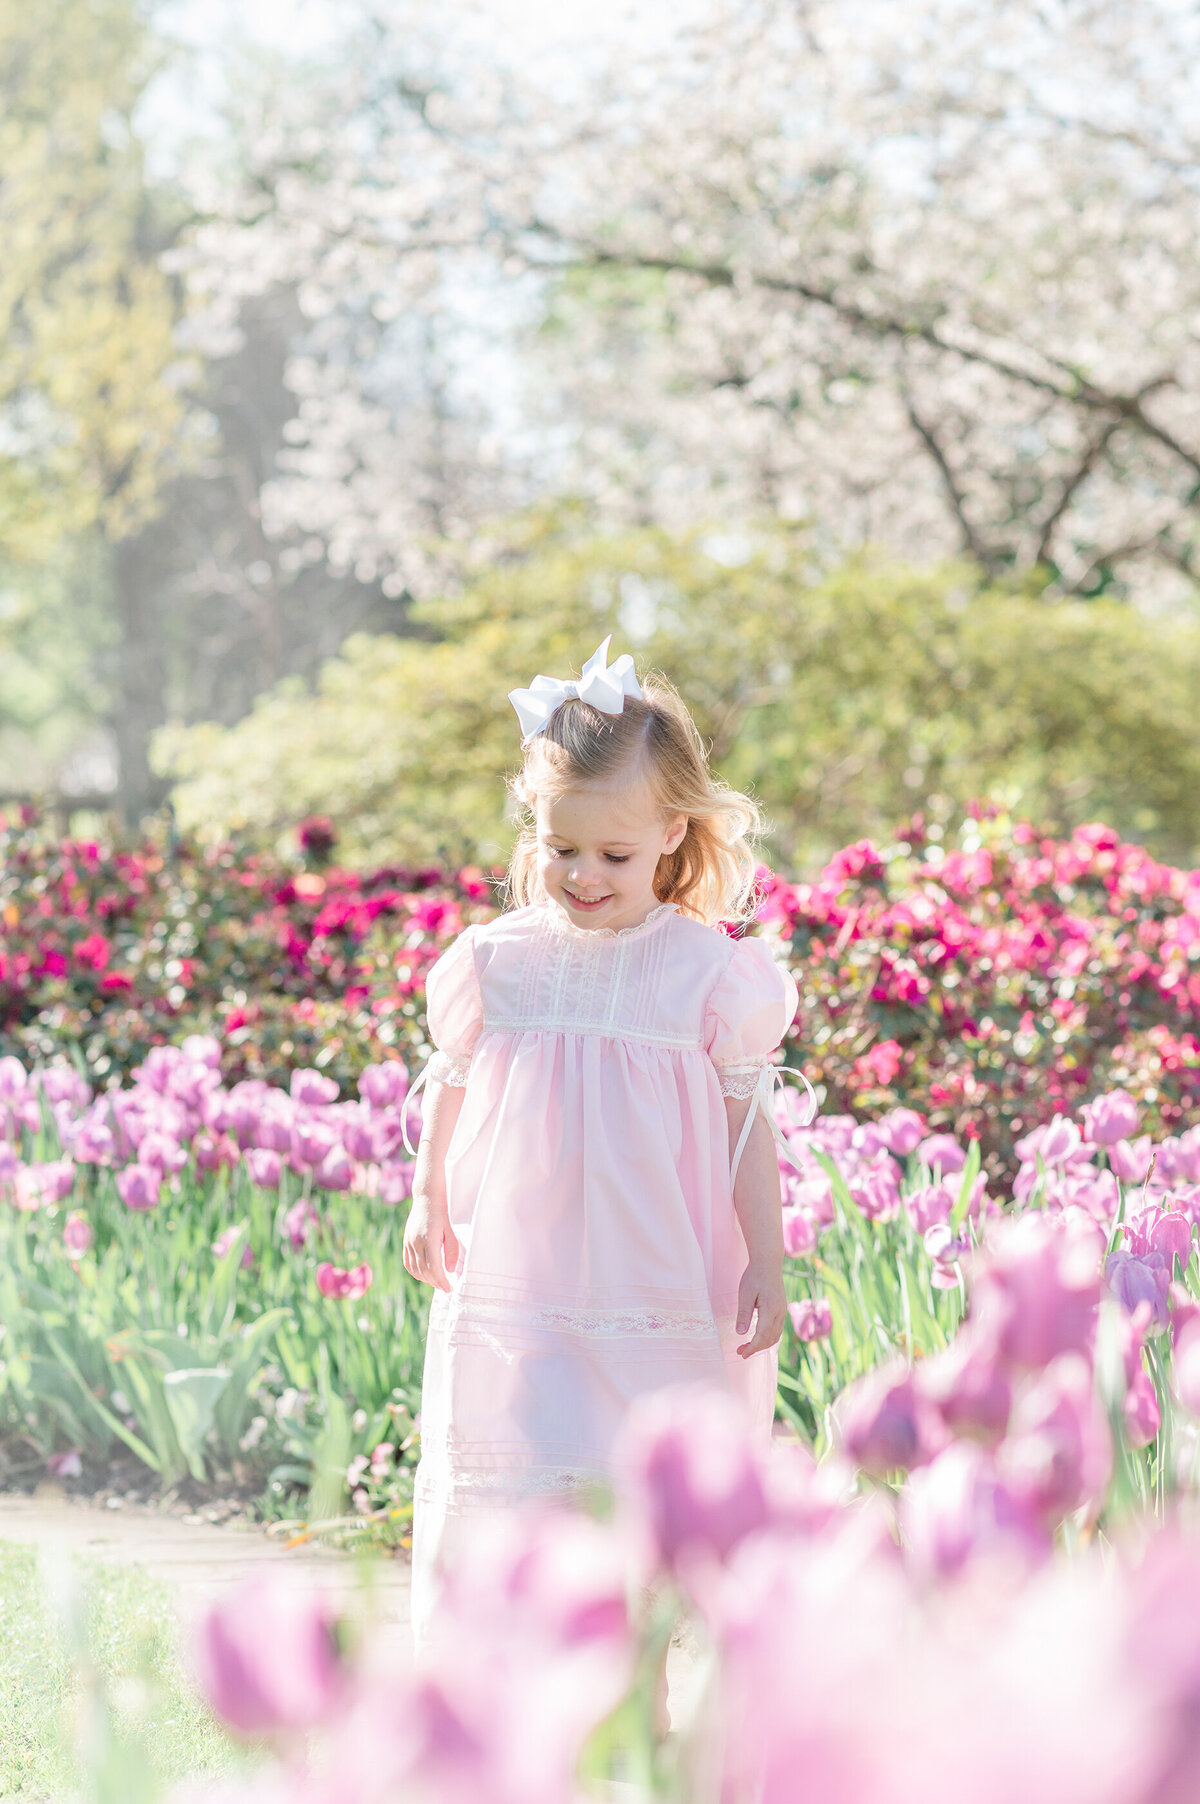 Young blonde girl delightfully smiling in a field of tulips.